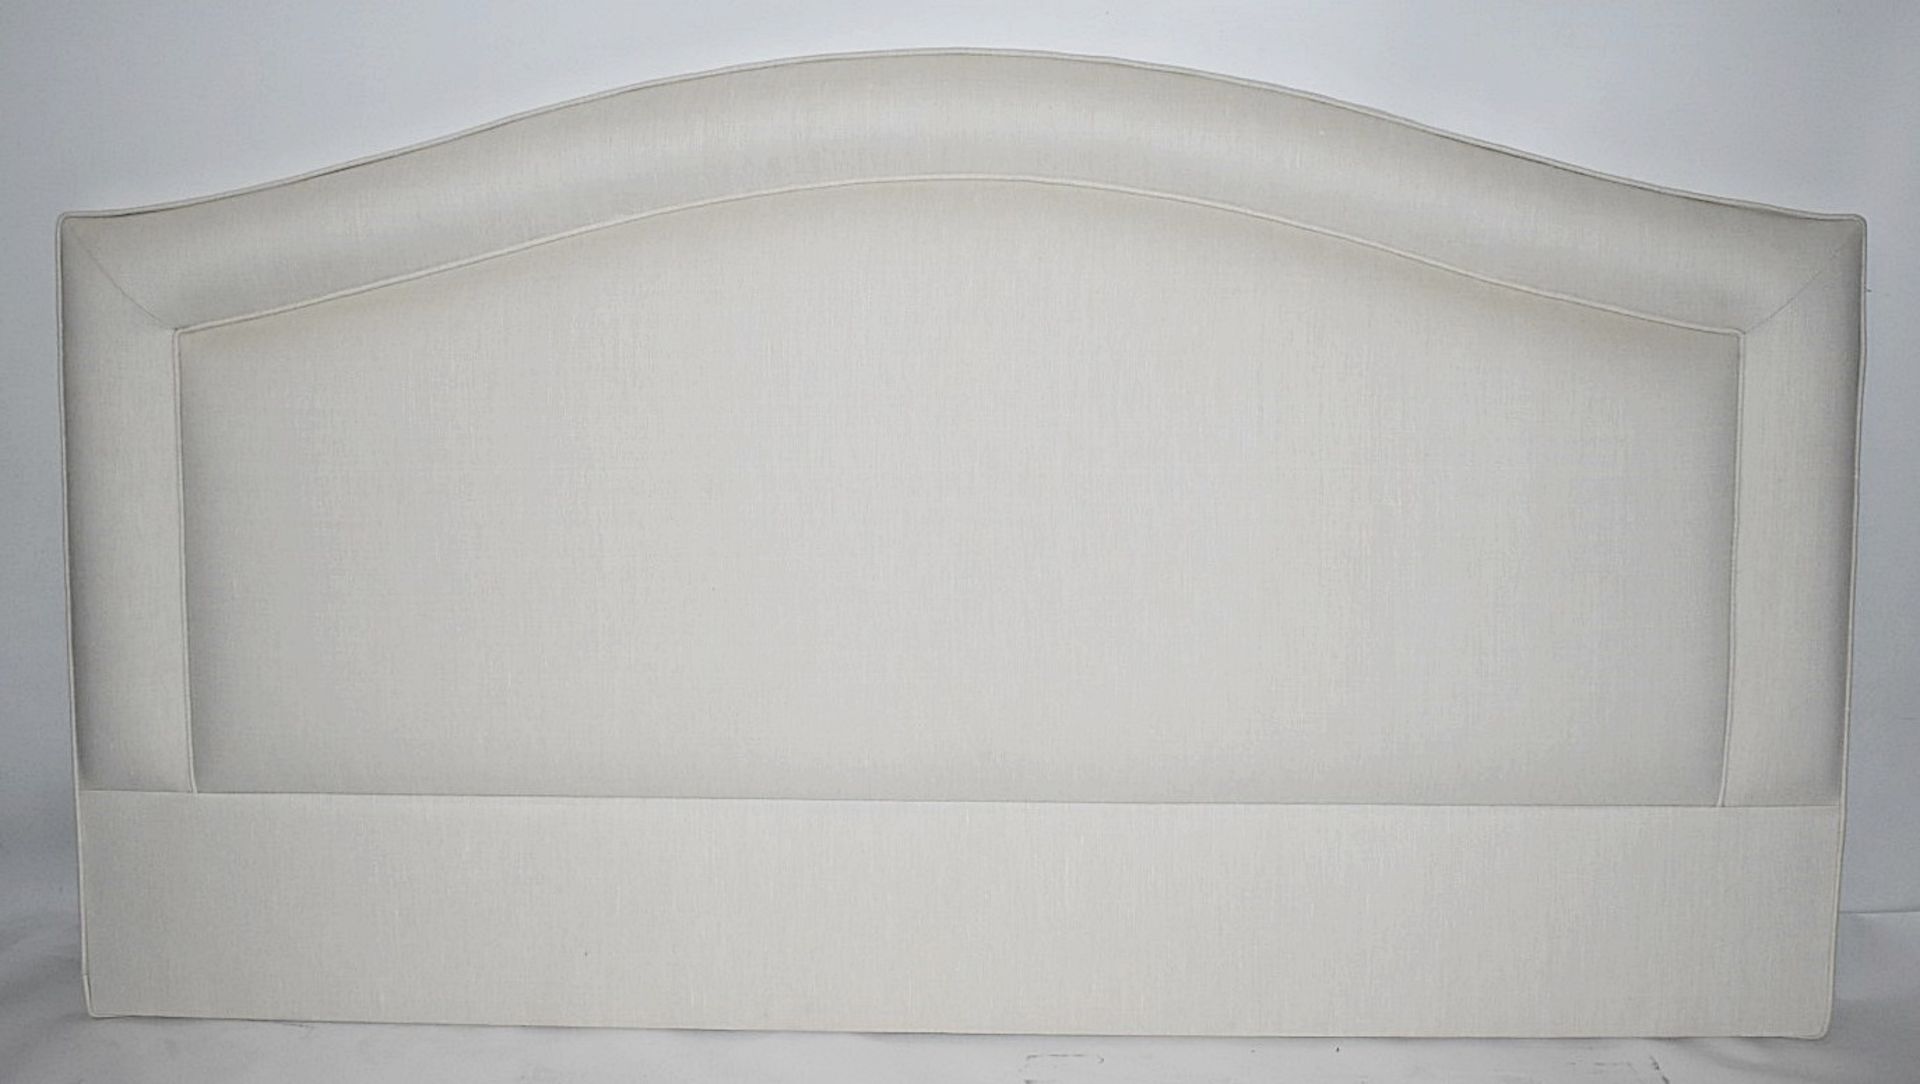 1 x VISPRING 'Artemis' King Size 150cm Headboard In A Pale Cream Pulled Cotton Fabric - RRP £970.00 - Image 4 of 7